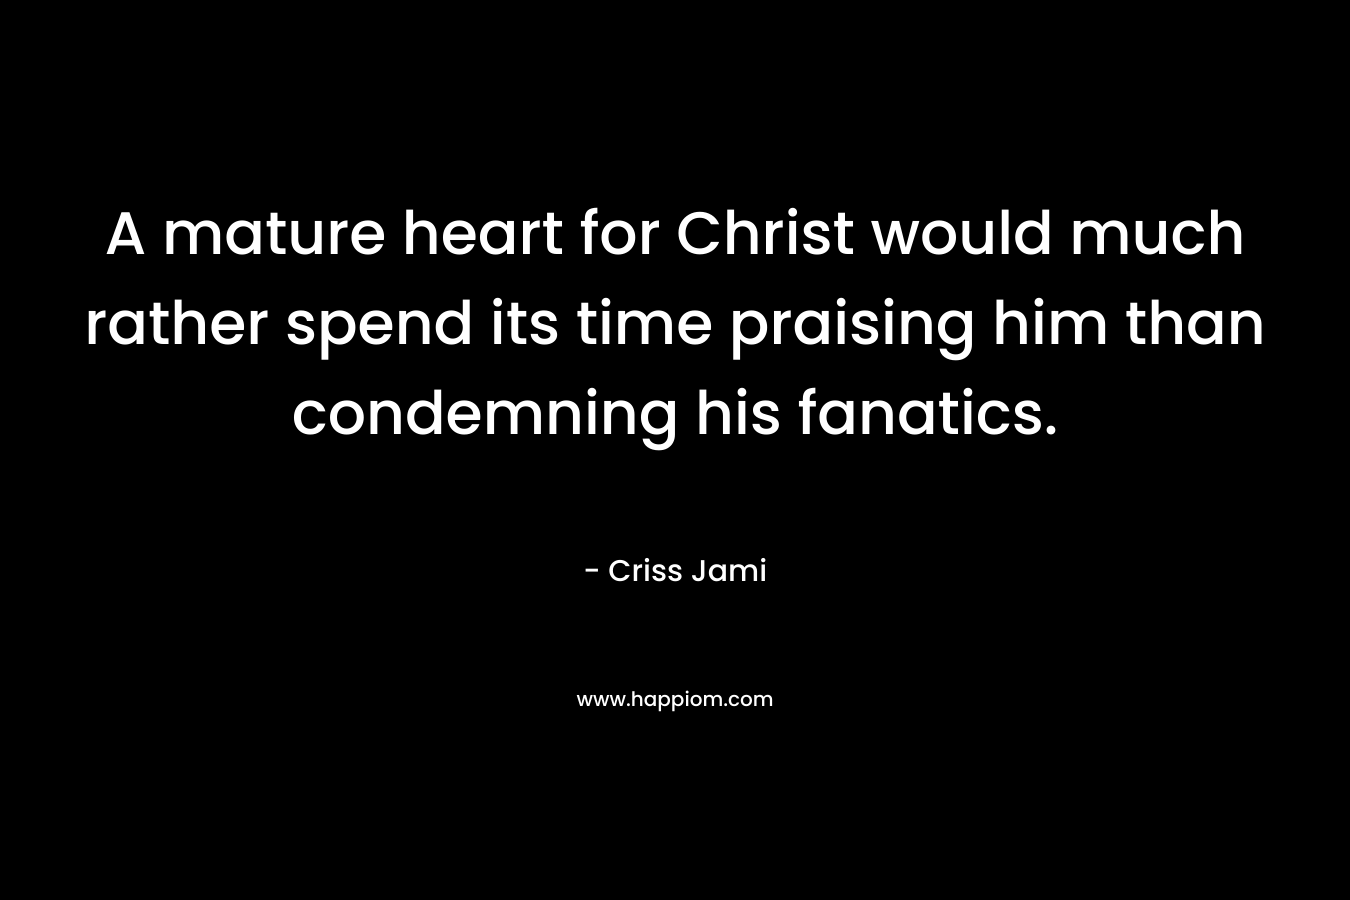 A mature heart for Christ would much rather spend its time praising him than condemning his fanatics. – Criss Jami